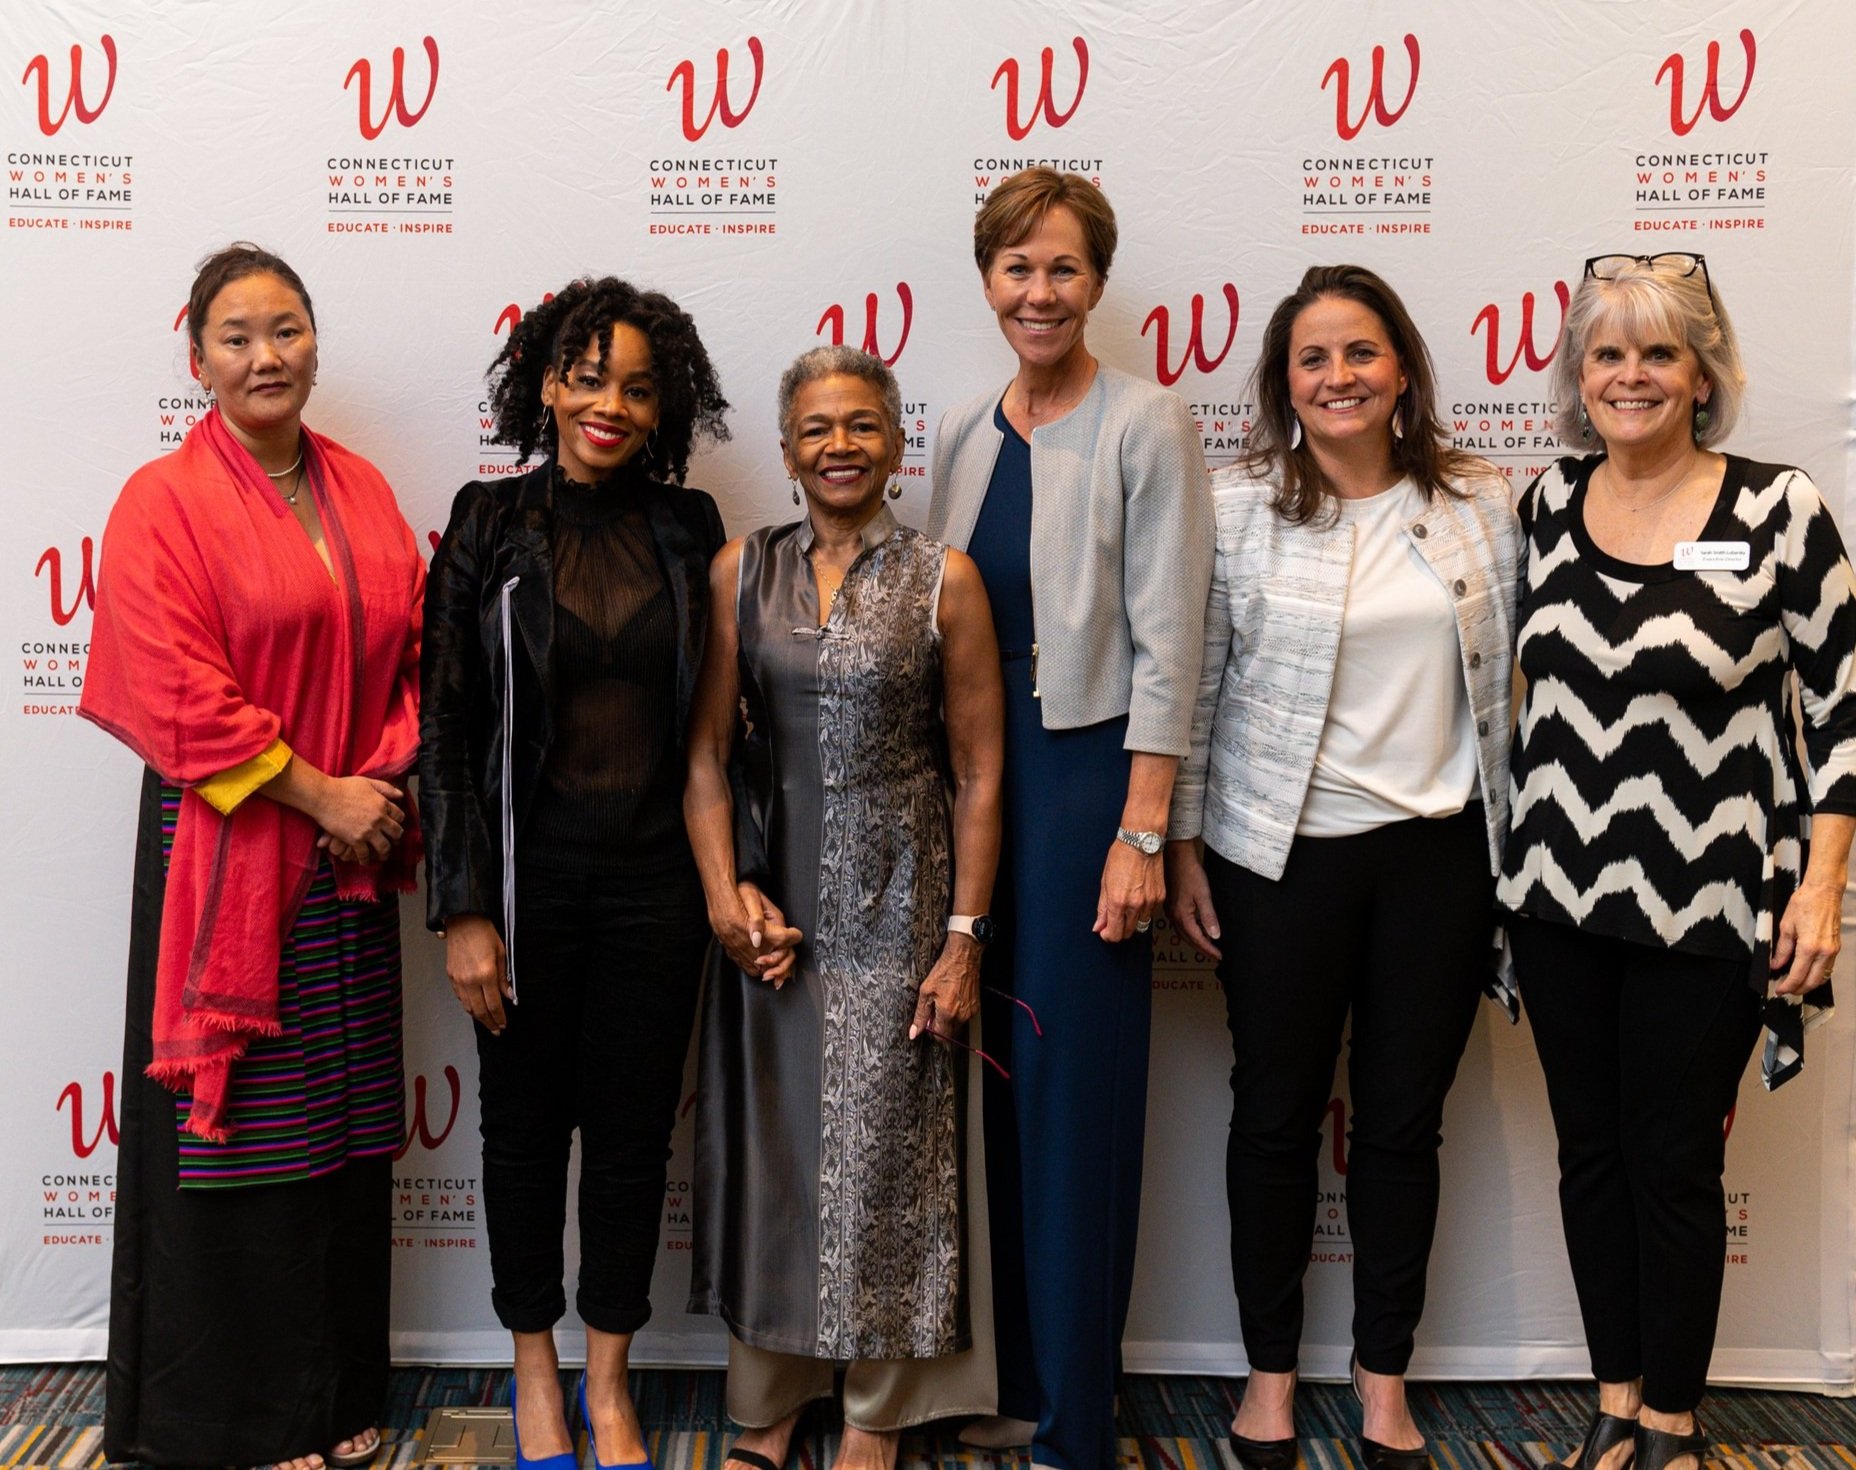 2022 Inductees | Lhakpa Sherpa, Anika Noni Rose & Claudia Rose (Accepting for Cora Lee Bentley Radcliffe), Suzy Whaley, Jennifer Rizzotti, and Sarah Lubarsky (Executive Director)